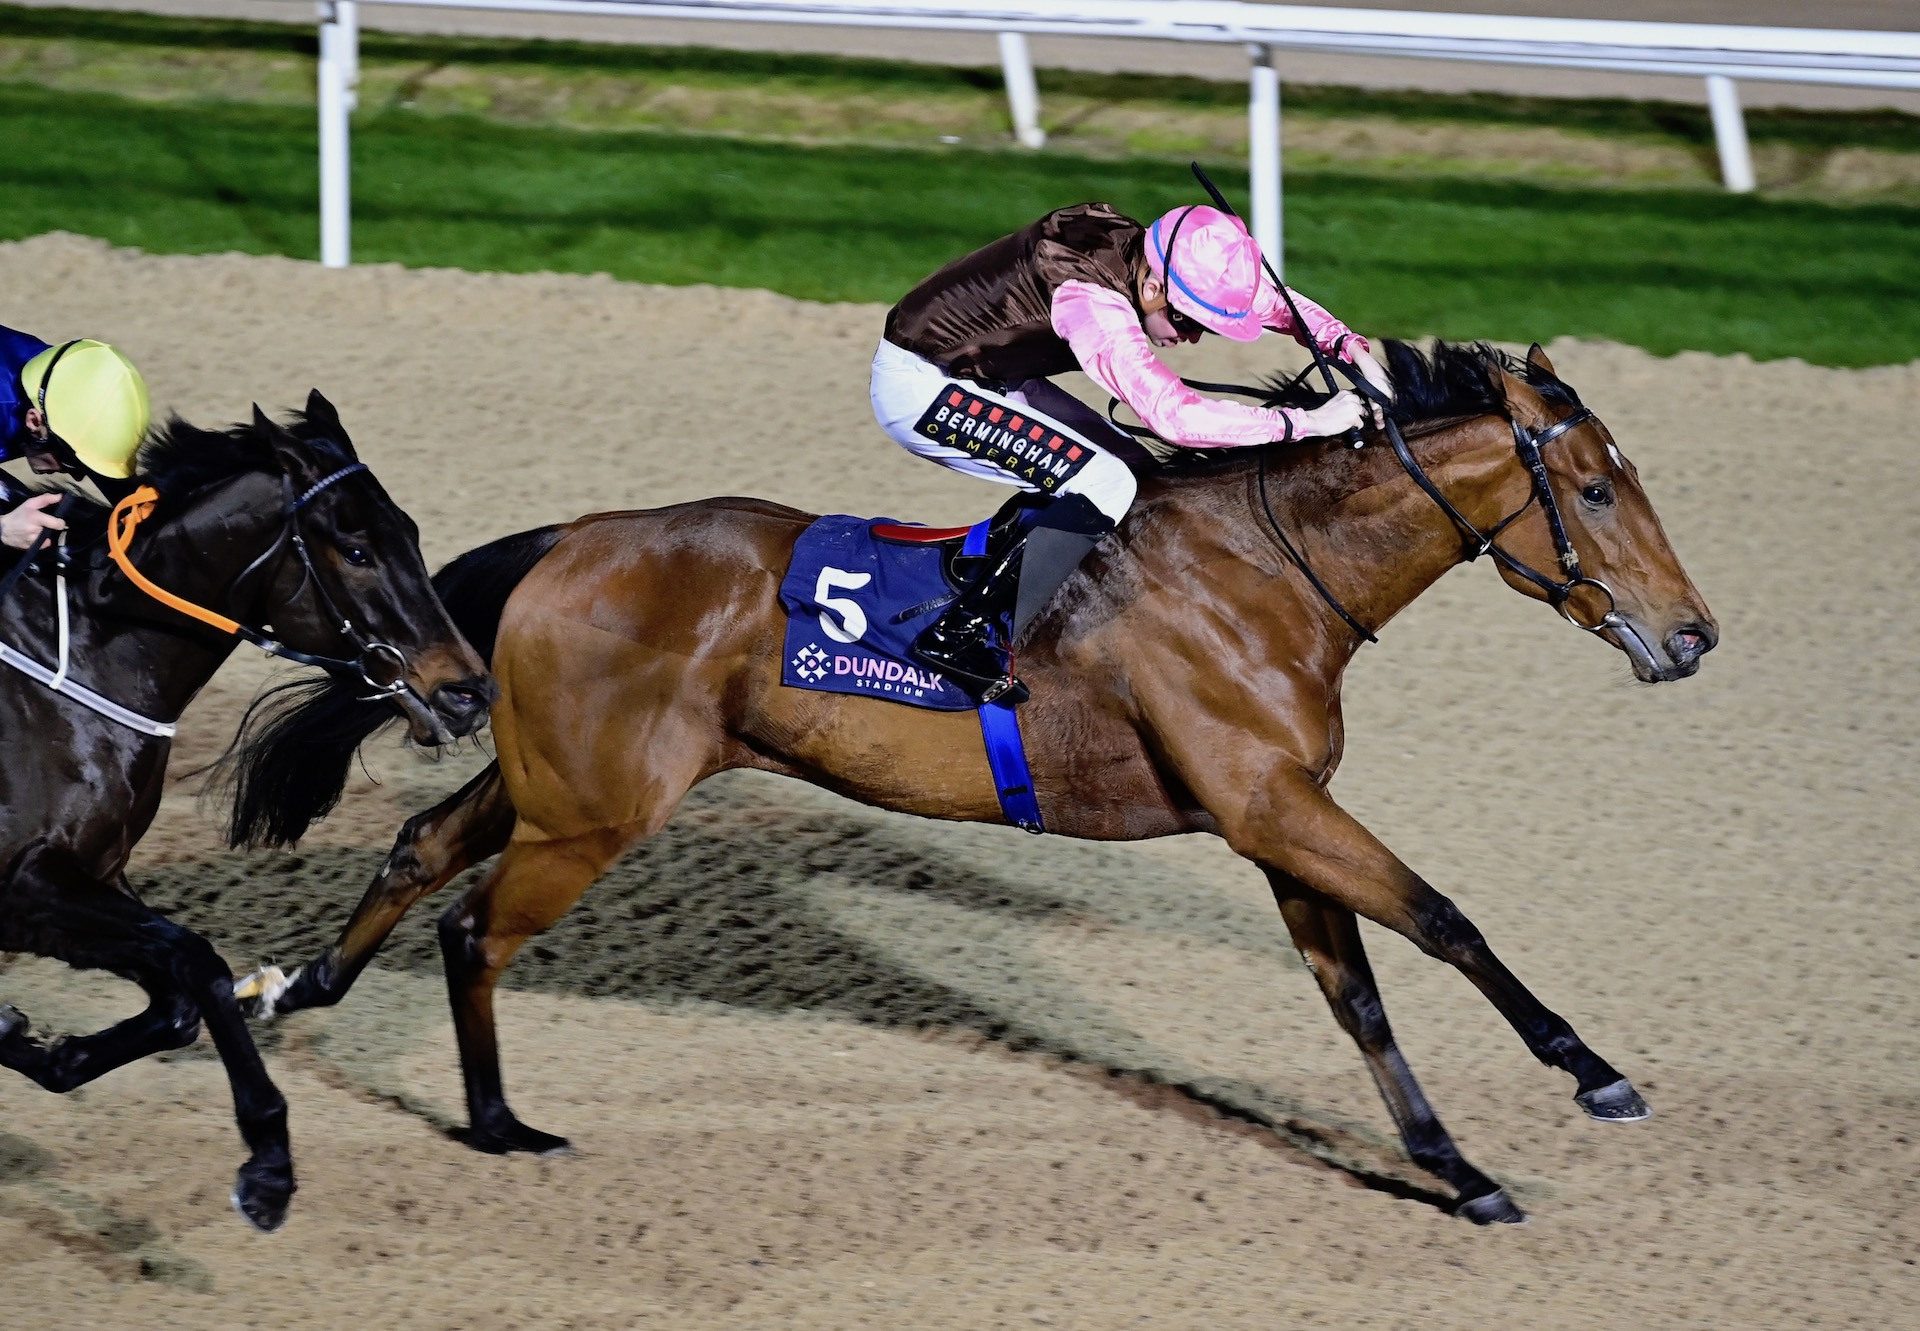 Capuchinero (Holy Roman Emperor) Wins Her Maiden At Dundalk